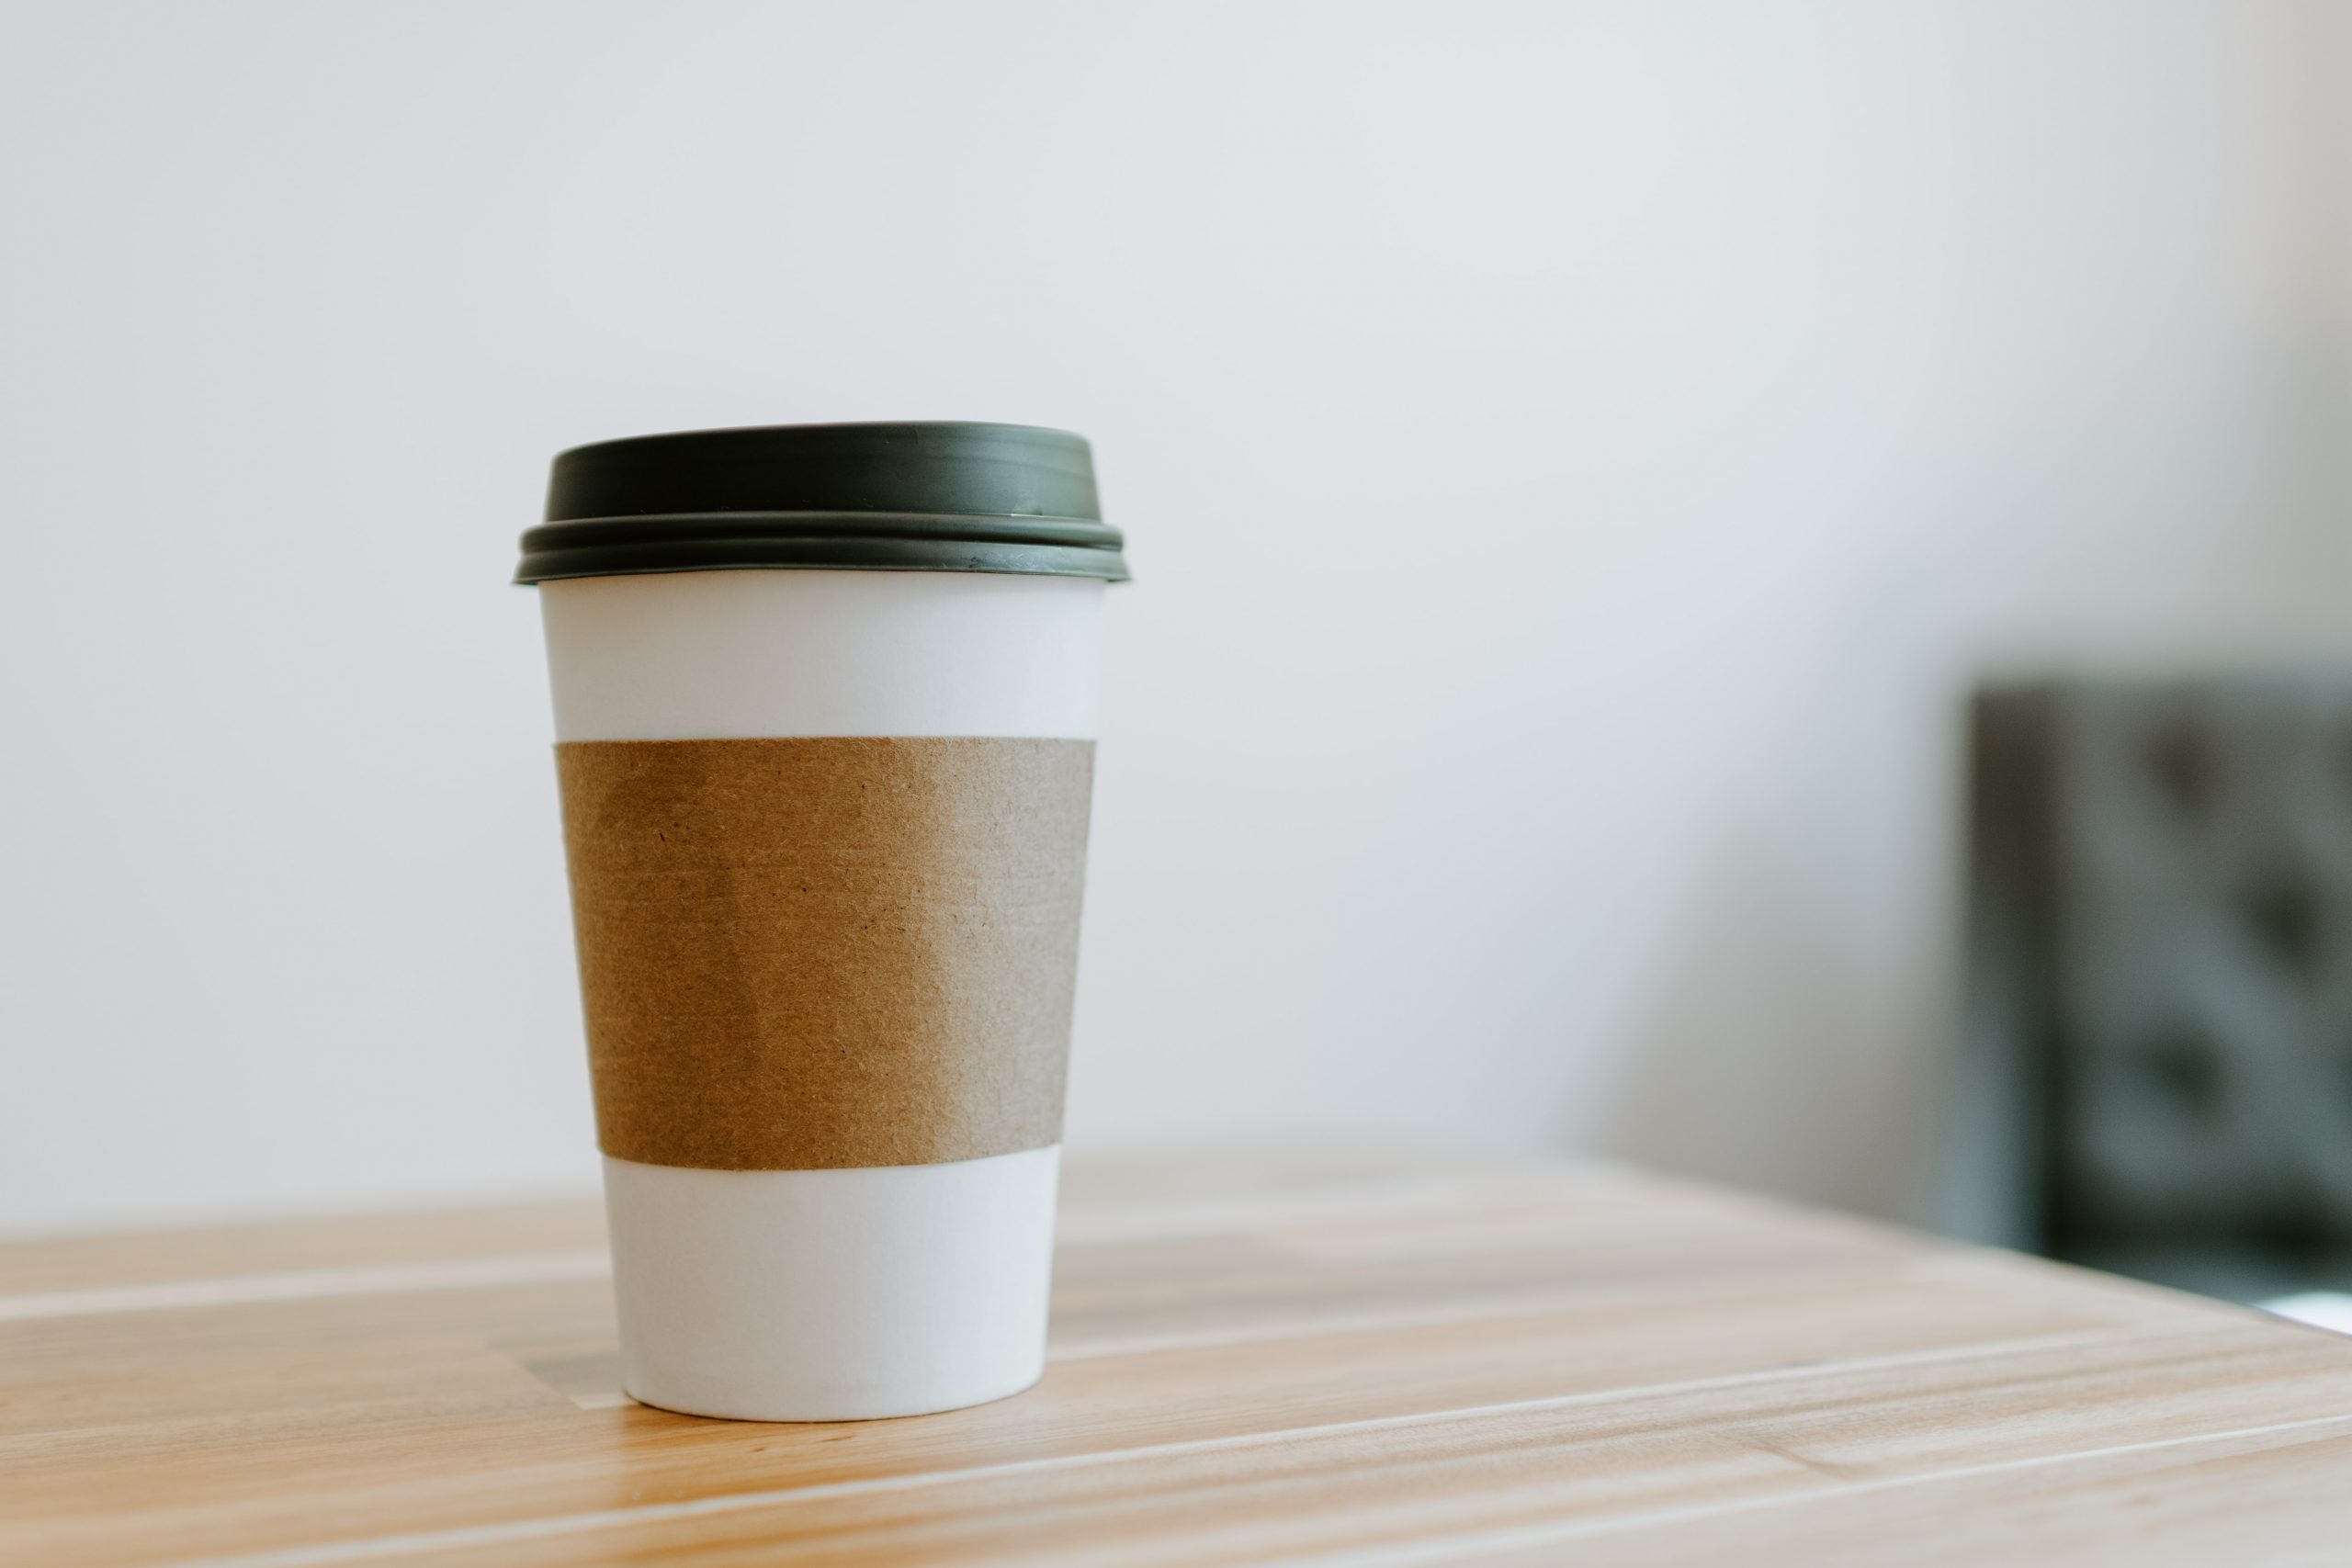 Five reasons why you should switch to a reusable coffee cup